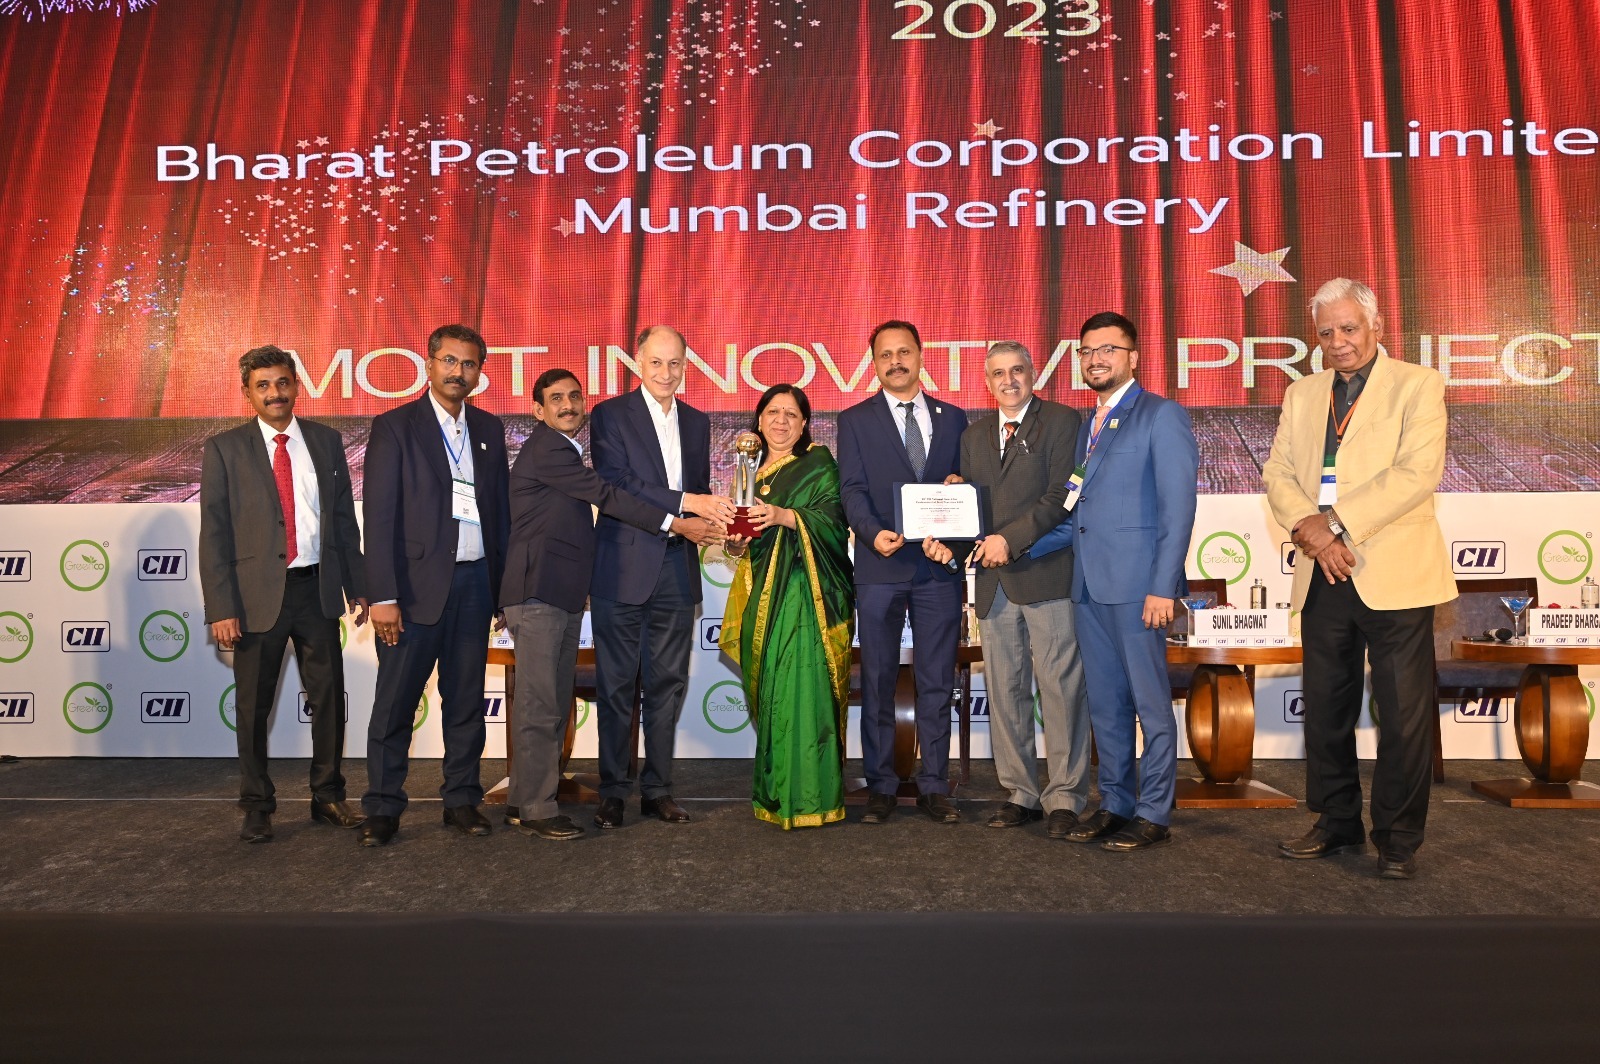 BPCL received the “CII National Award for Environmental Best Practices 2023"